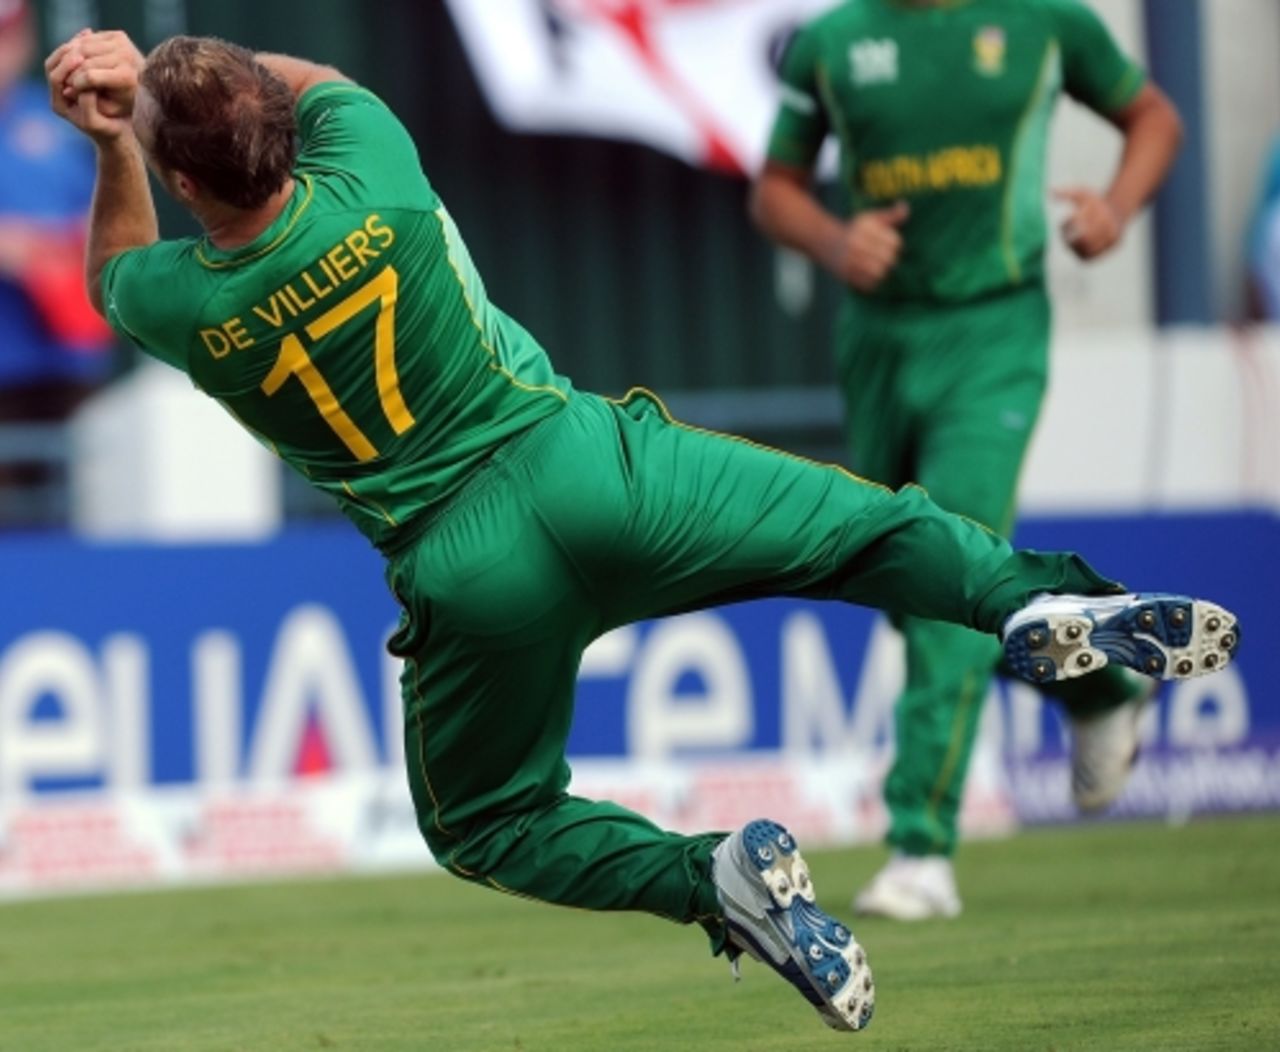 AB de Villiers took a superb, diving catch at wide long on to get rid of Eoin Morgan, England v South Africa, World T20, Group E, Bridgetown, May 8, 2010